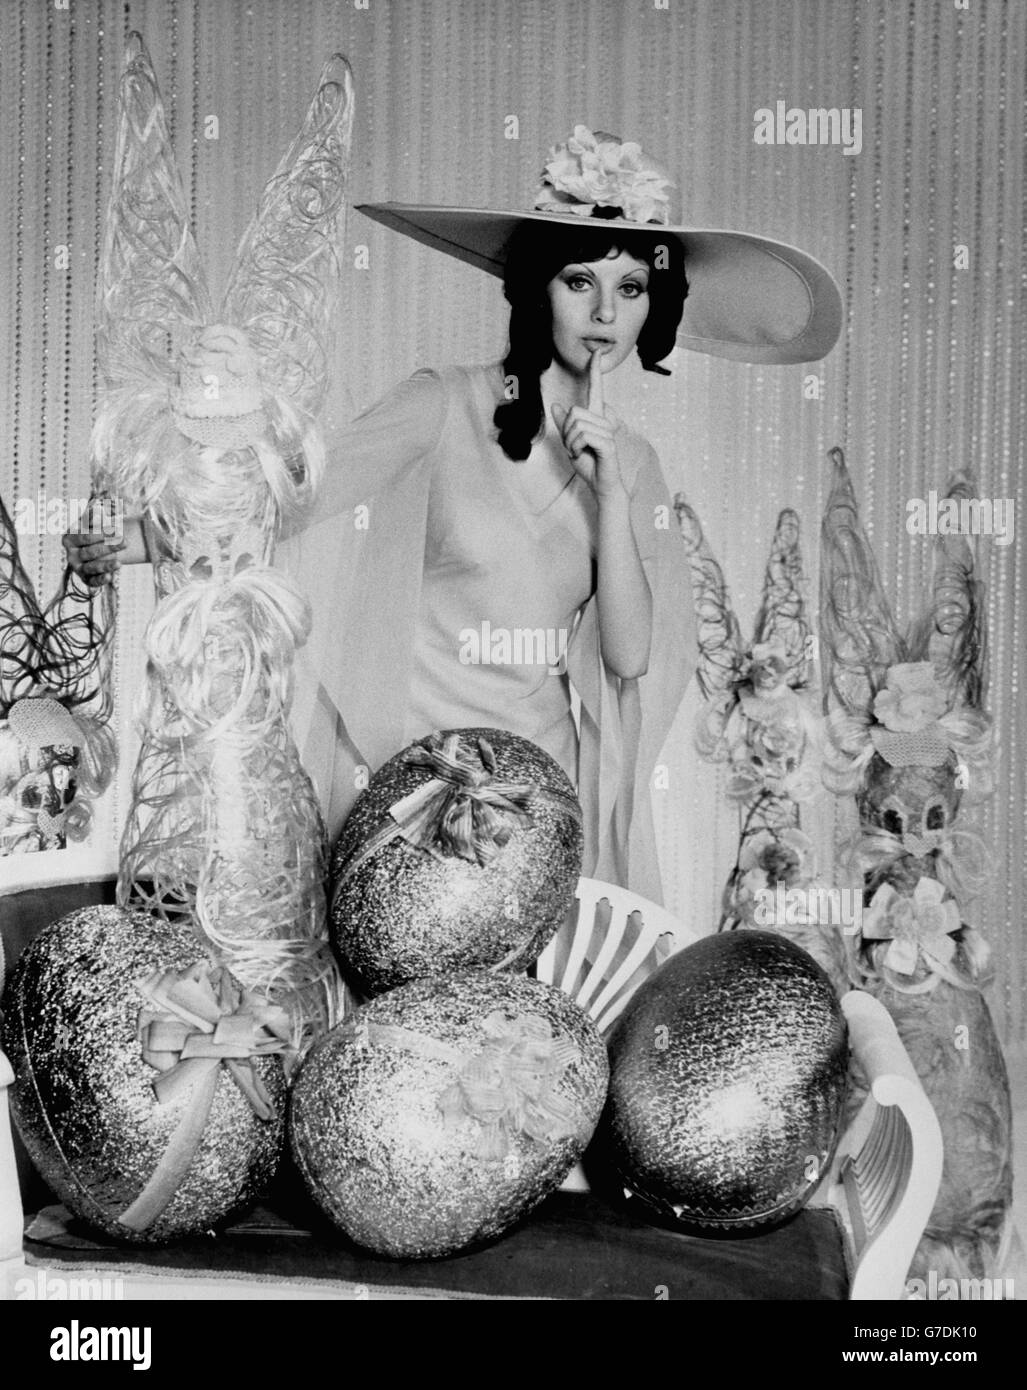 Intent on wishing filmgoers an old fashioned Easter is 21-year-old Valli Kemp, 'Miss Australia, 1970', who makes her film debut as Vincent Price's leading lady in 'Dr Phibes Rises Again'. Valli, donned in draperies and a picture hat, to pose alongside giant Easter eggs and bunnies. Stock Photo